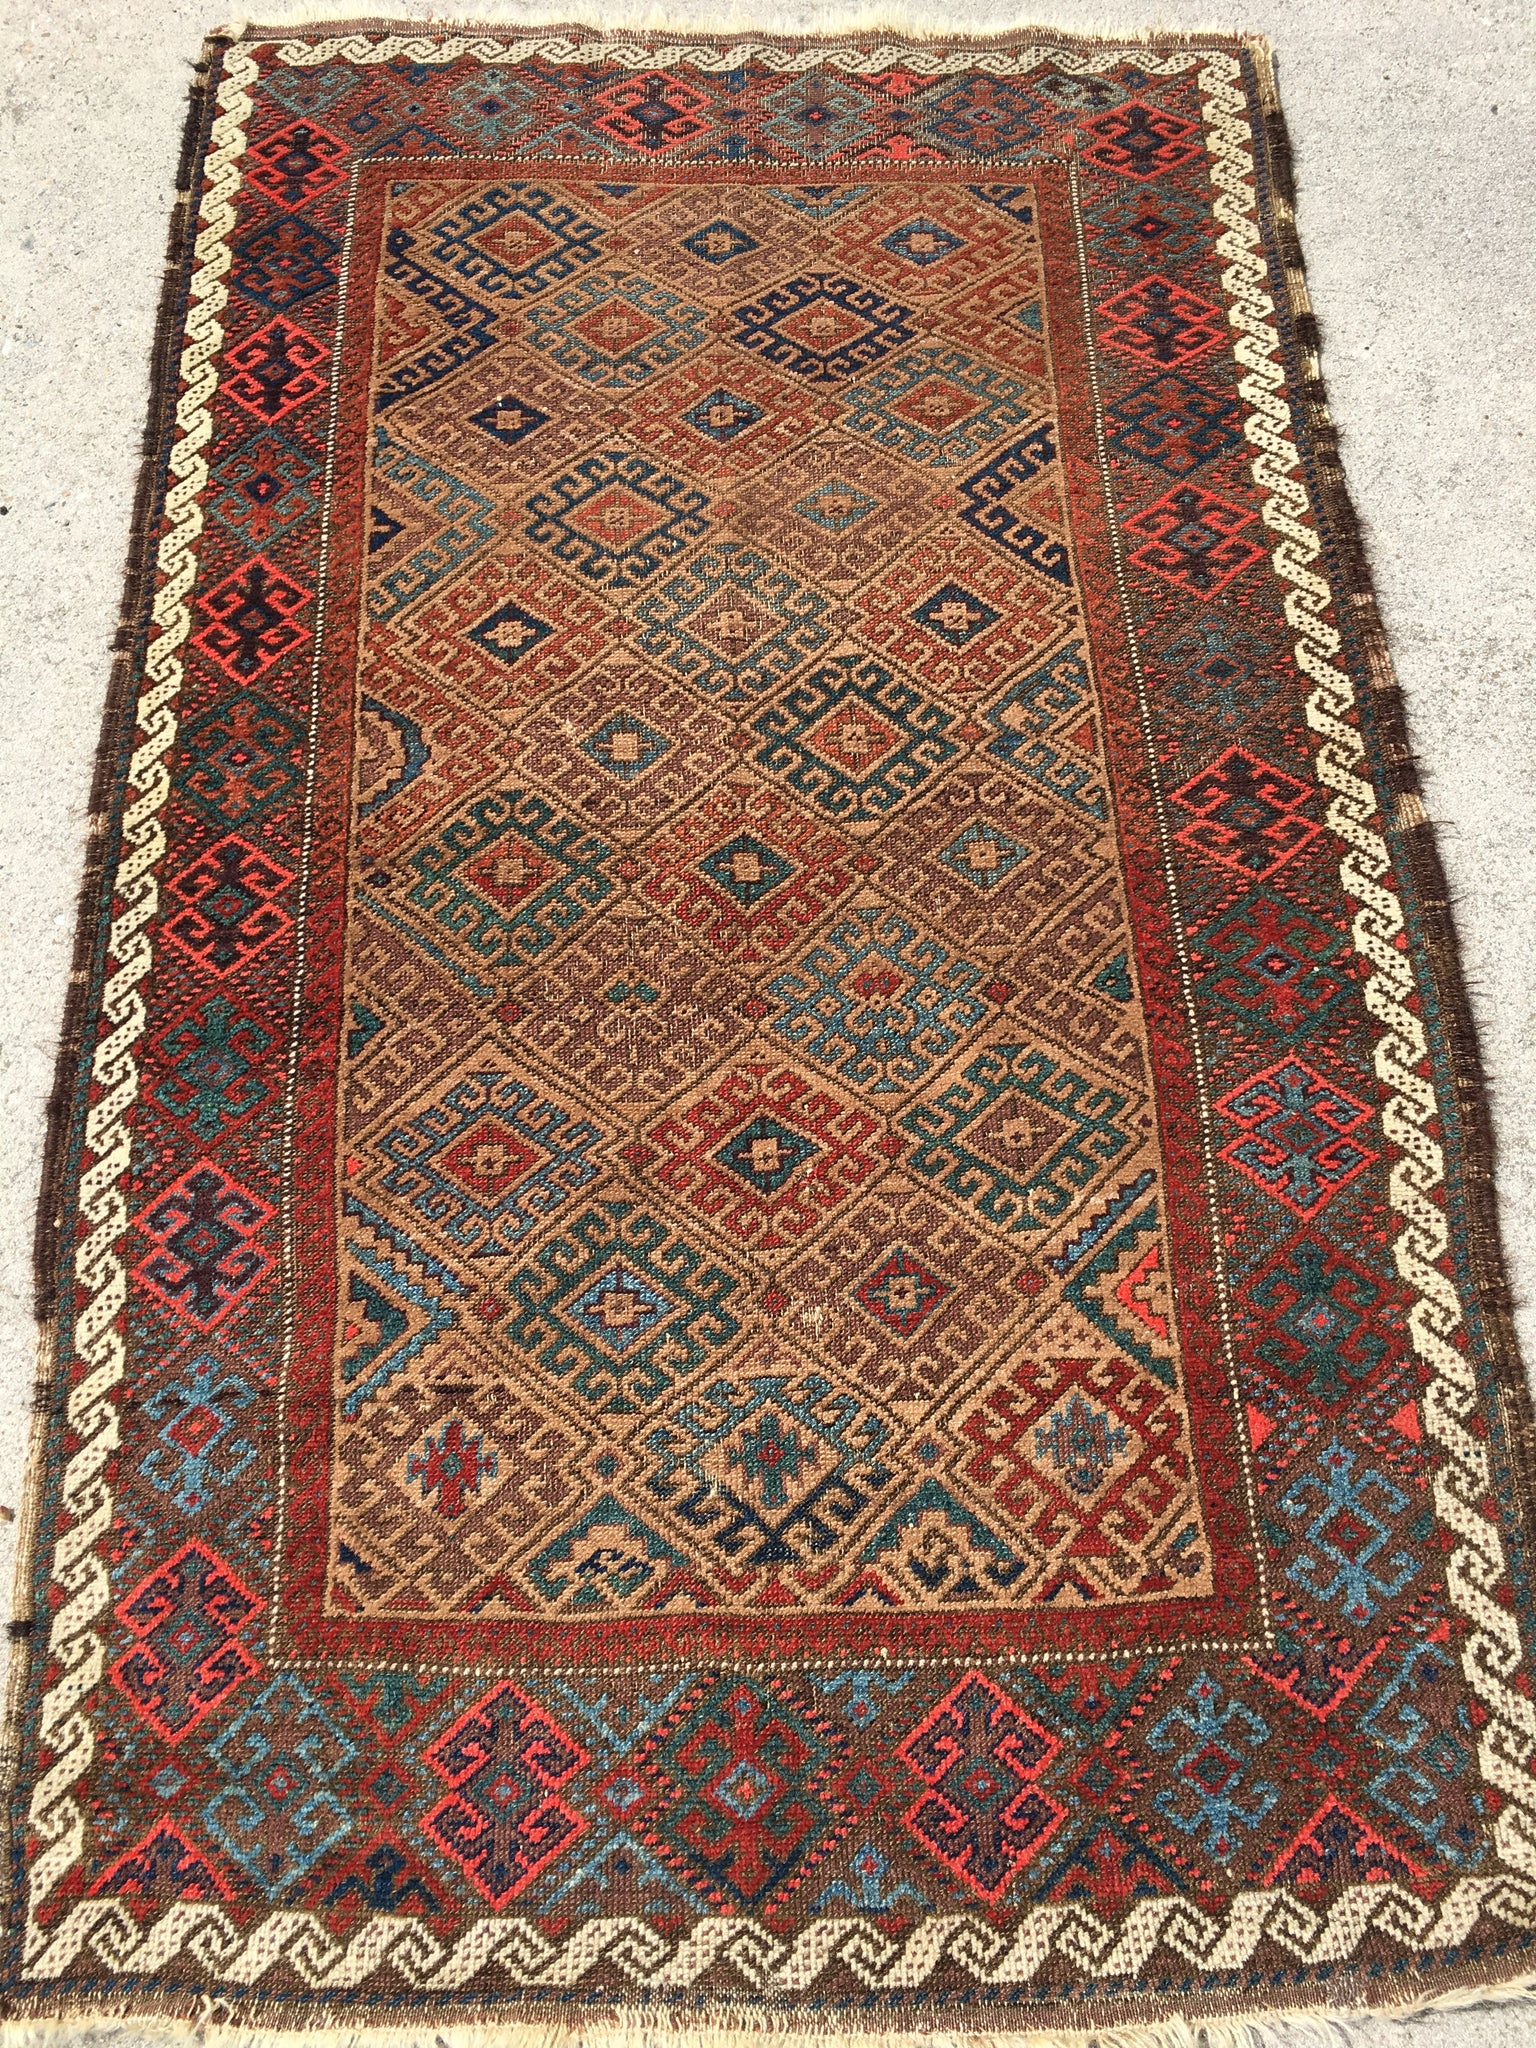 4' 4 x 3' 3 Baluch Authentic Persian Hand Knotted Area Rug - 112581